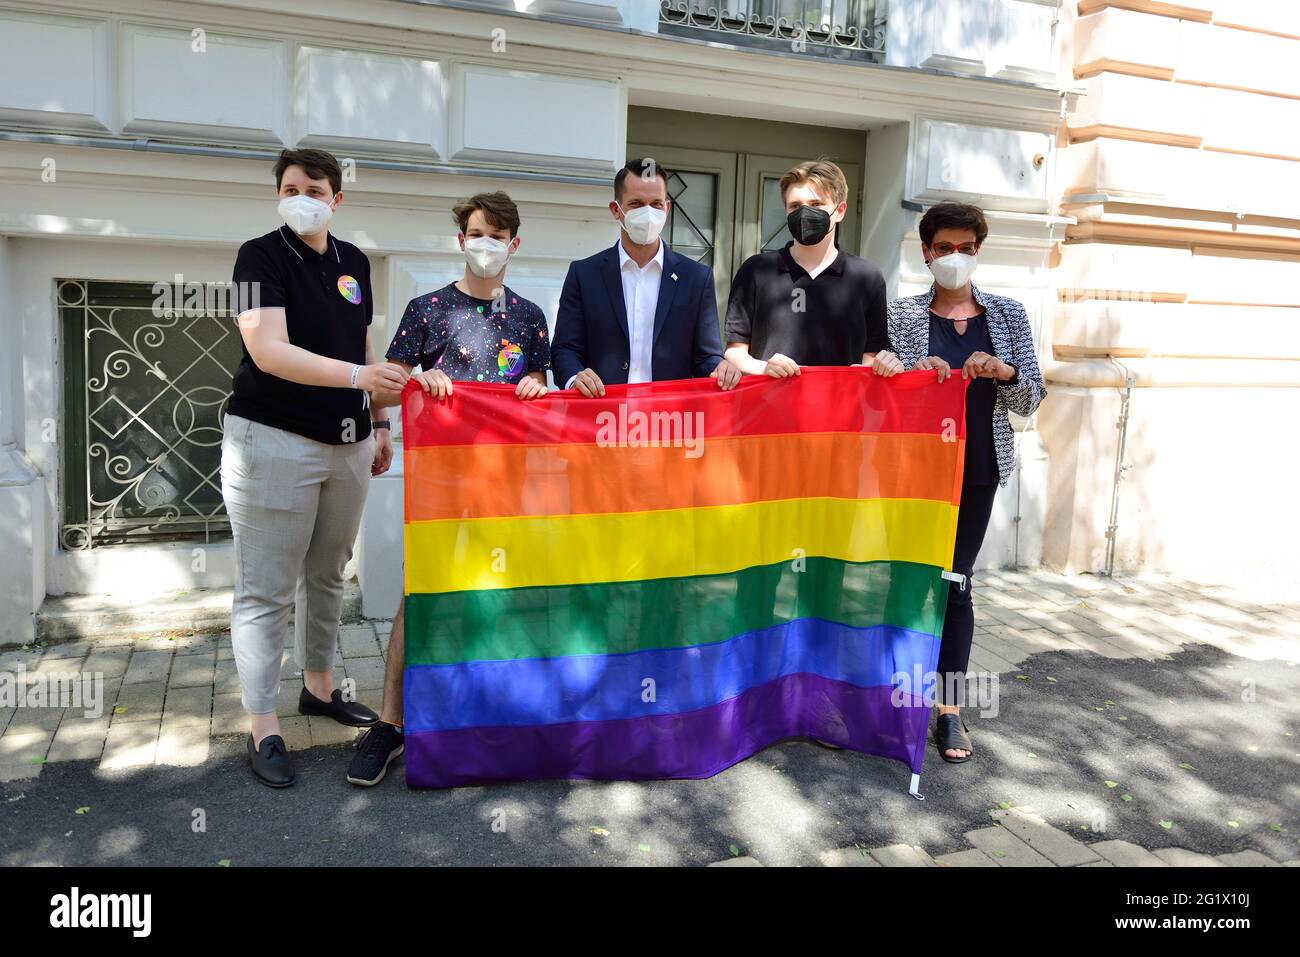 Vienna, Austria. 7th June, 2021. Raising the rainbow flag at AHS Rahlgasse with Health Minister Wolfgang Mückstein (3rd of L). Credit: Franz Perc / Alamy Live News Stock Photo